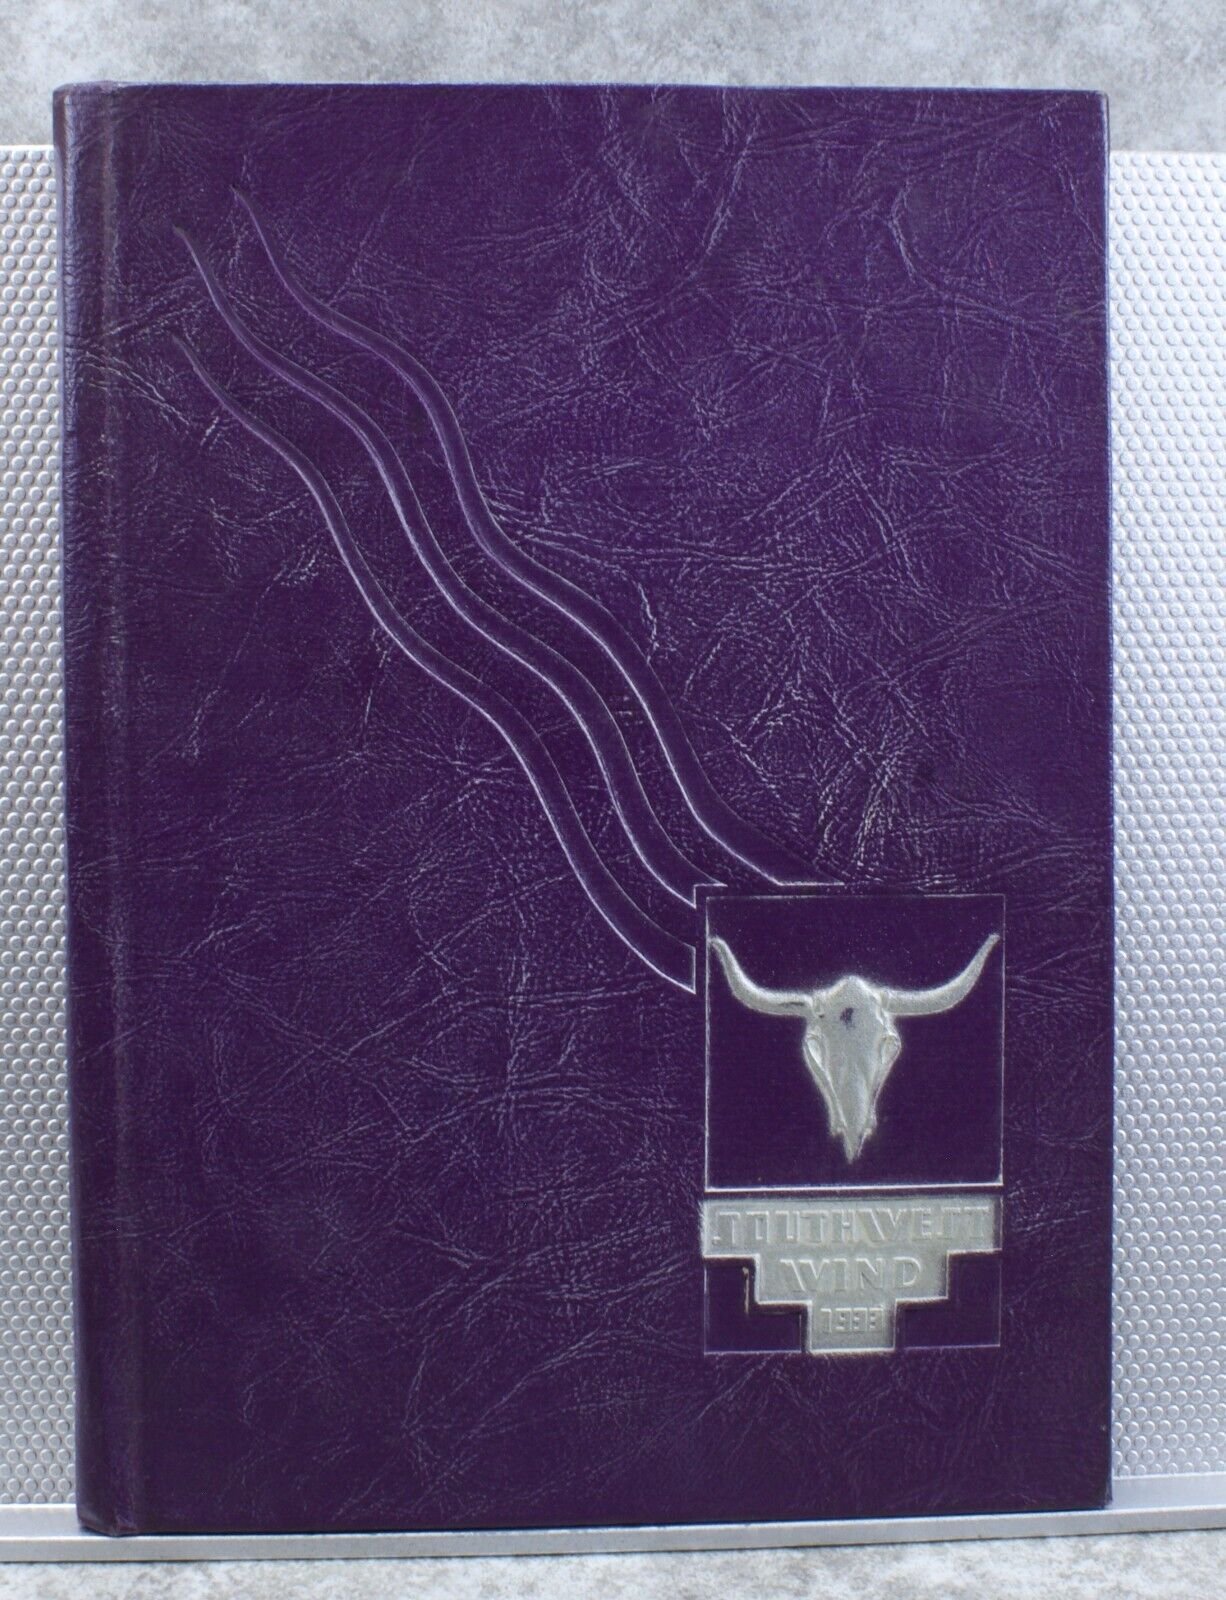 1933 Highlands University Yearbook Las Vegas New Mexico The Southwest Wind